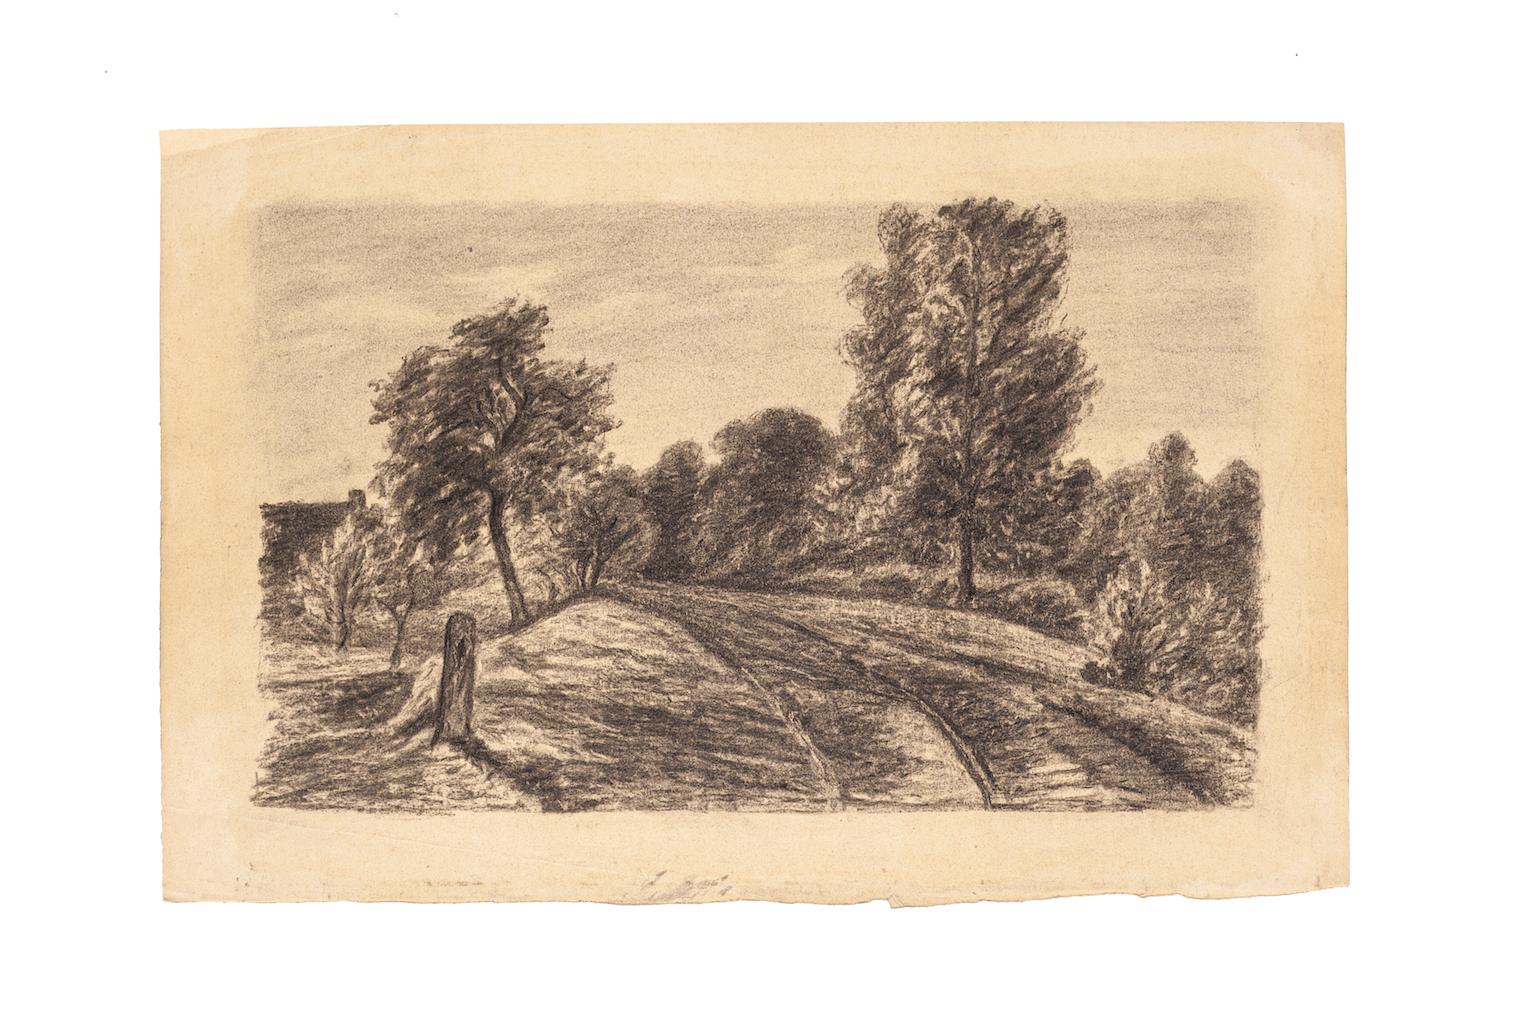 Unknown Figurative Art - Landscape - Drawing in Pencil on Paper - 20th Century